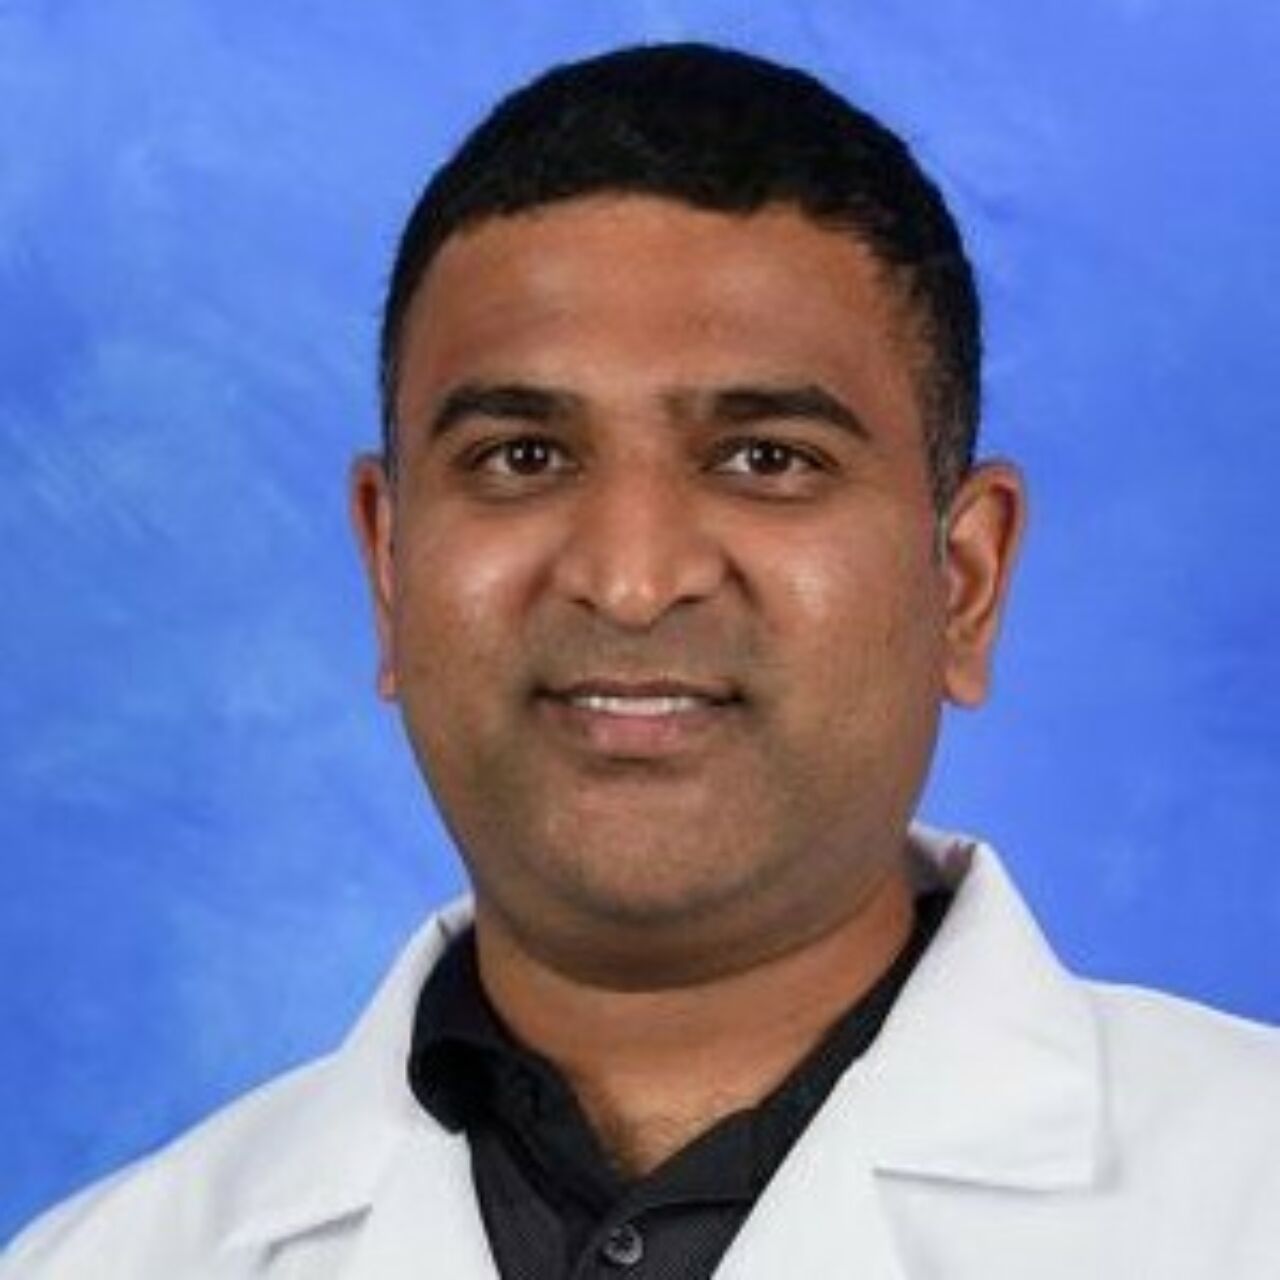 Professional headshot of Dr. Ravishankar Rao, a medical liaison to Penn State Musical Theatre serving as a point of access for general health and performance related health conditions.